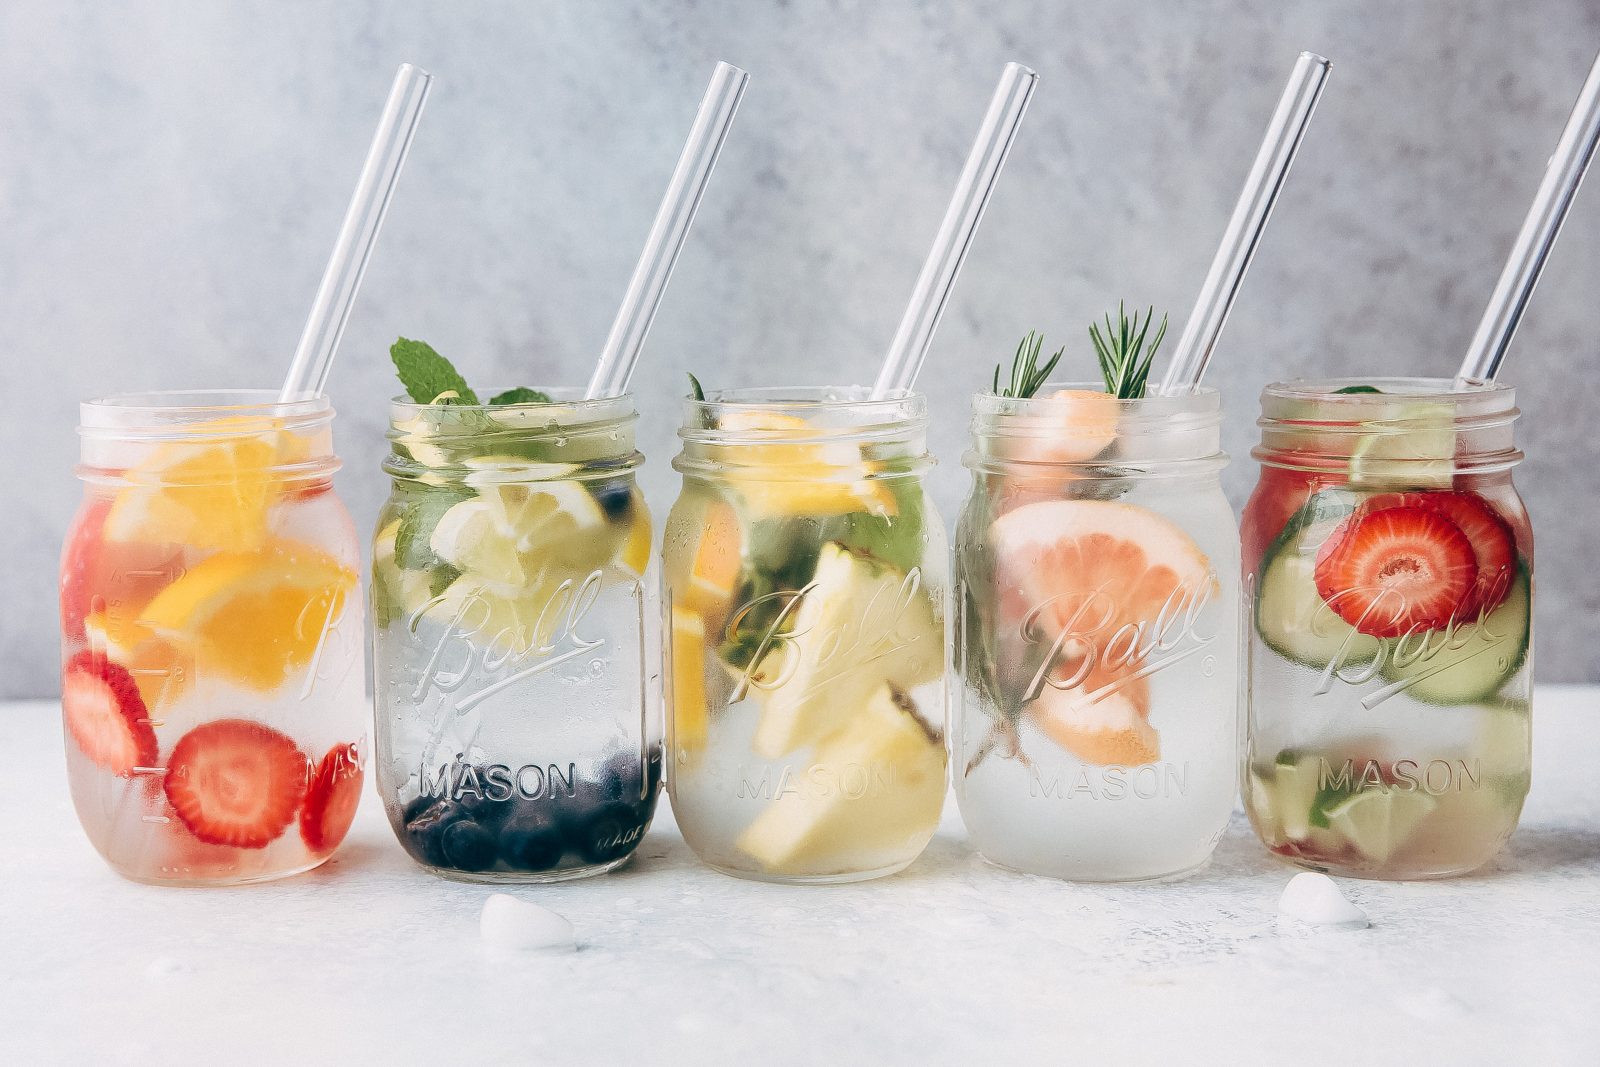 5 Infused Waters to Sip on This Summer - 5 recipes for infused water that you can enjoy all summer long! A great alternative to carbonated beverages and it's prettier to look at too! #infusedwater #water #infusedwaterrecipe | Littlespicejar.com